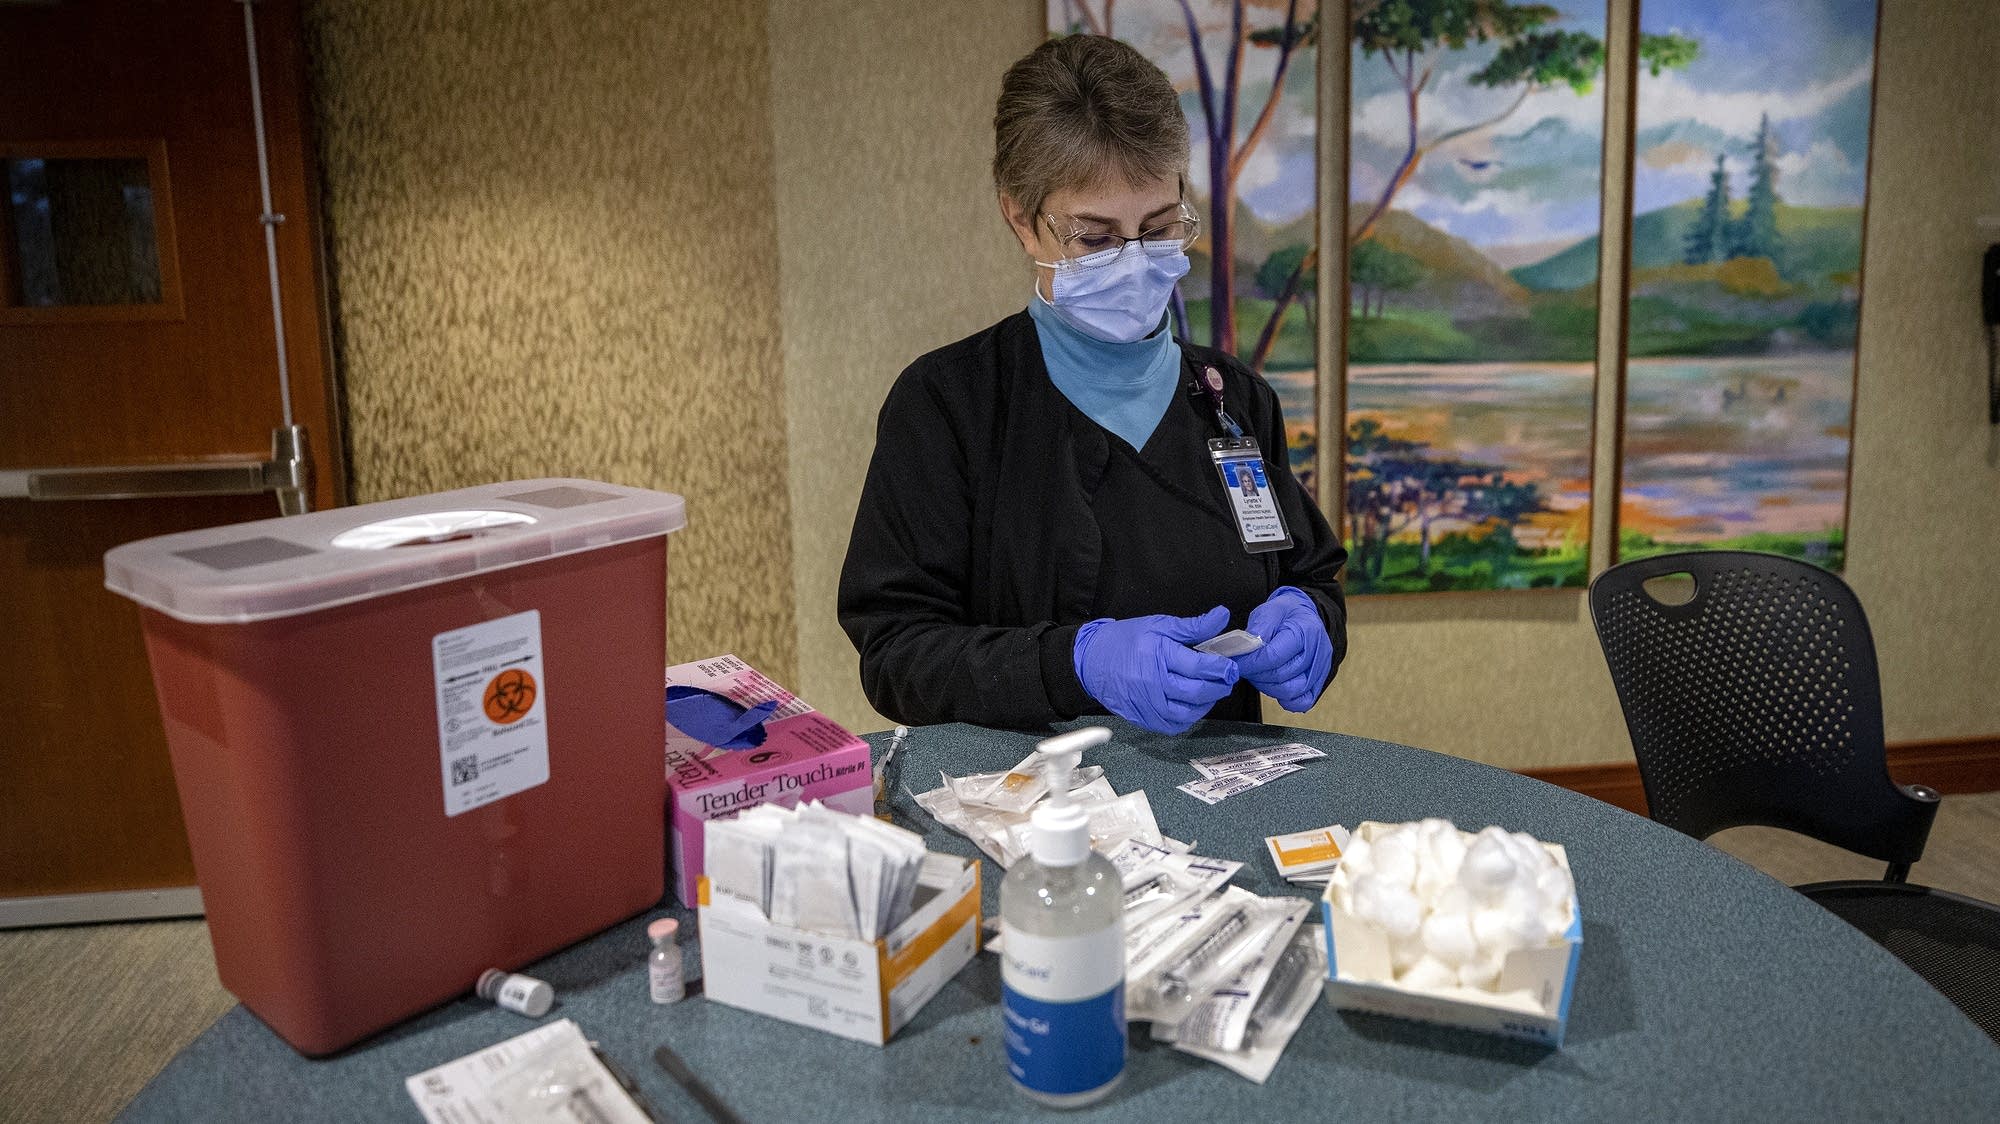 Latest on COVID-19 in MN: Solid pandemic metrics; vexing vaccination gaps